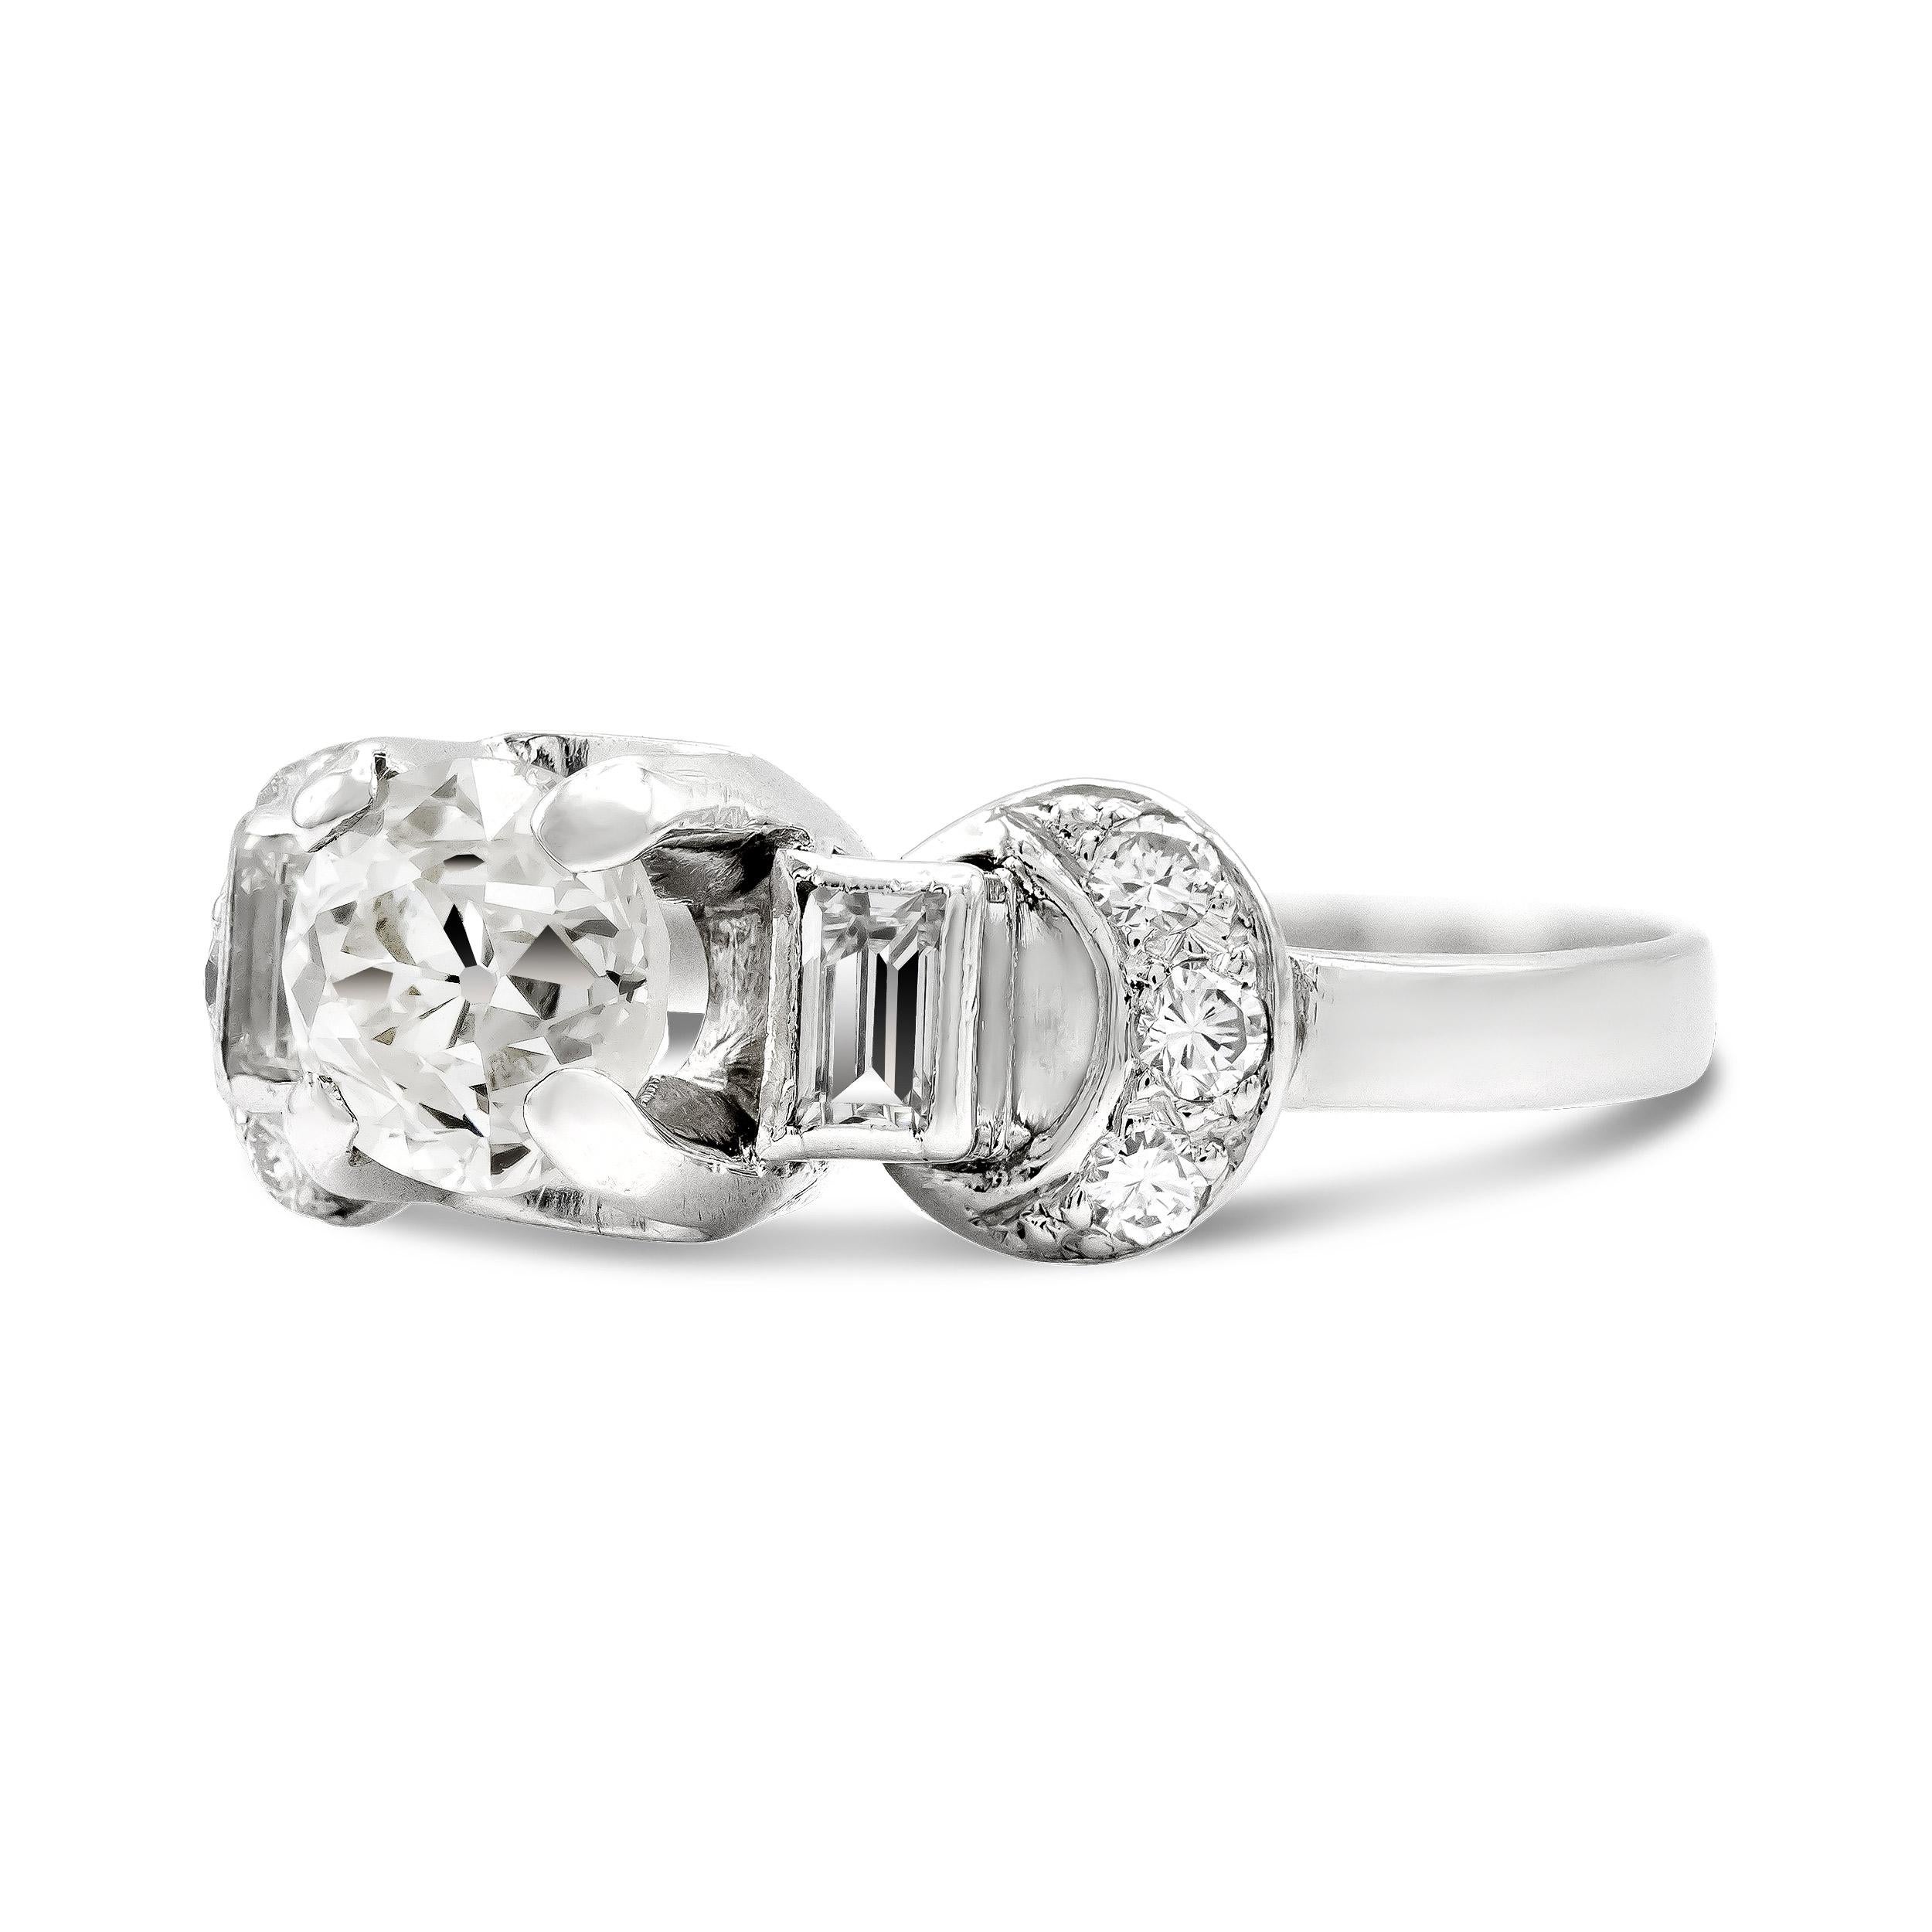 This one-of-a-kind engagement ring is sure to please any lover of deco design. Her tiered shoulders, adorned with straight baguettes and old European cut diamonds are an incredible example of the beauty of deco. The center diamond looks like the